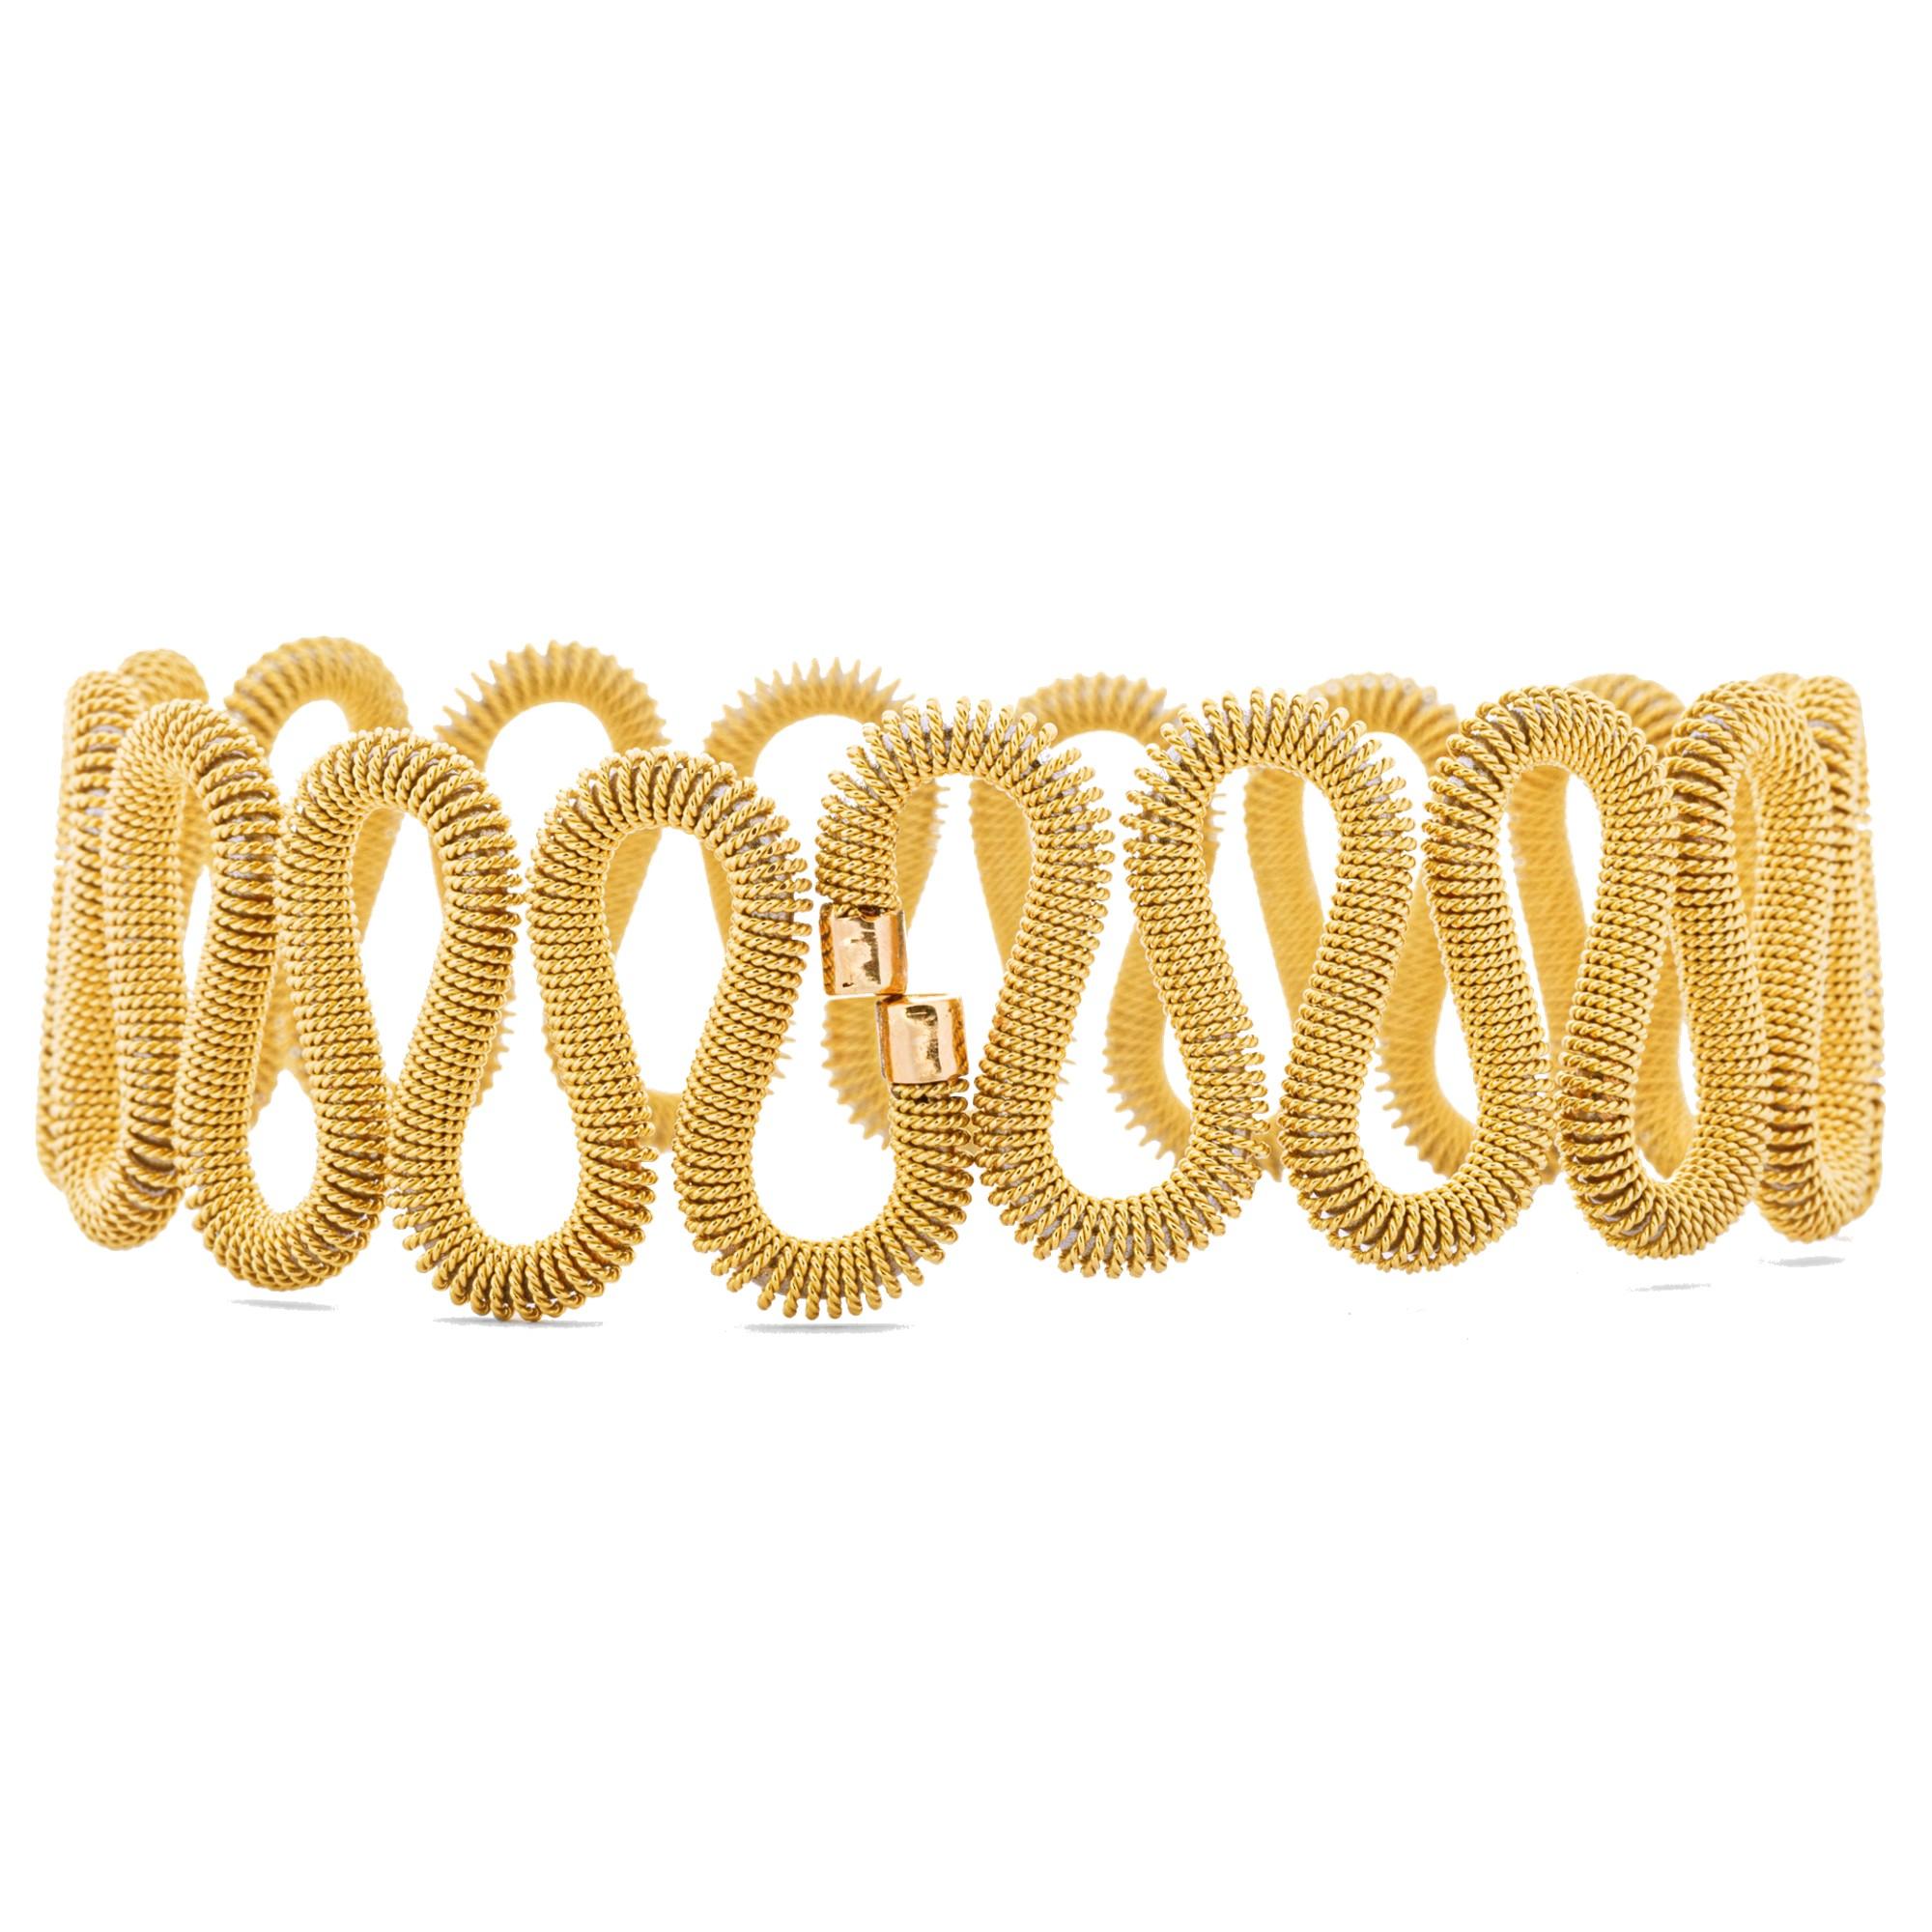 This flexible bangle bracelet has a steel core covered by a twisted 18 Karat yellow gold wire. Designed by Alex Jona and hand crafted in Italy. Width 7cm- 2.76in., Hight 5.5cm-2.16in.
Alex Jona jewels stand out, not only for their special design and